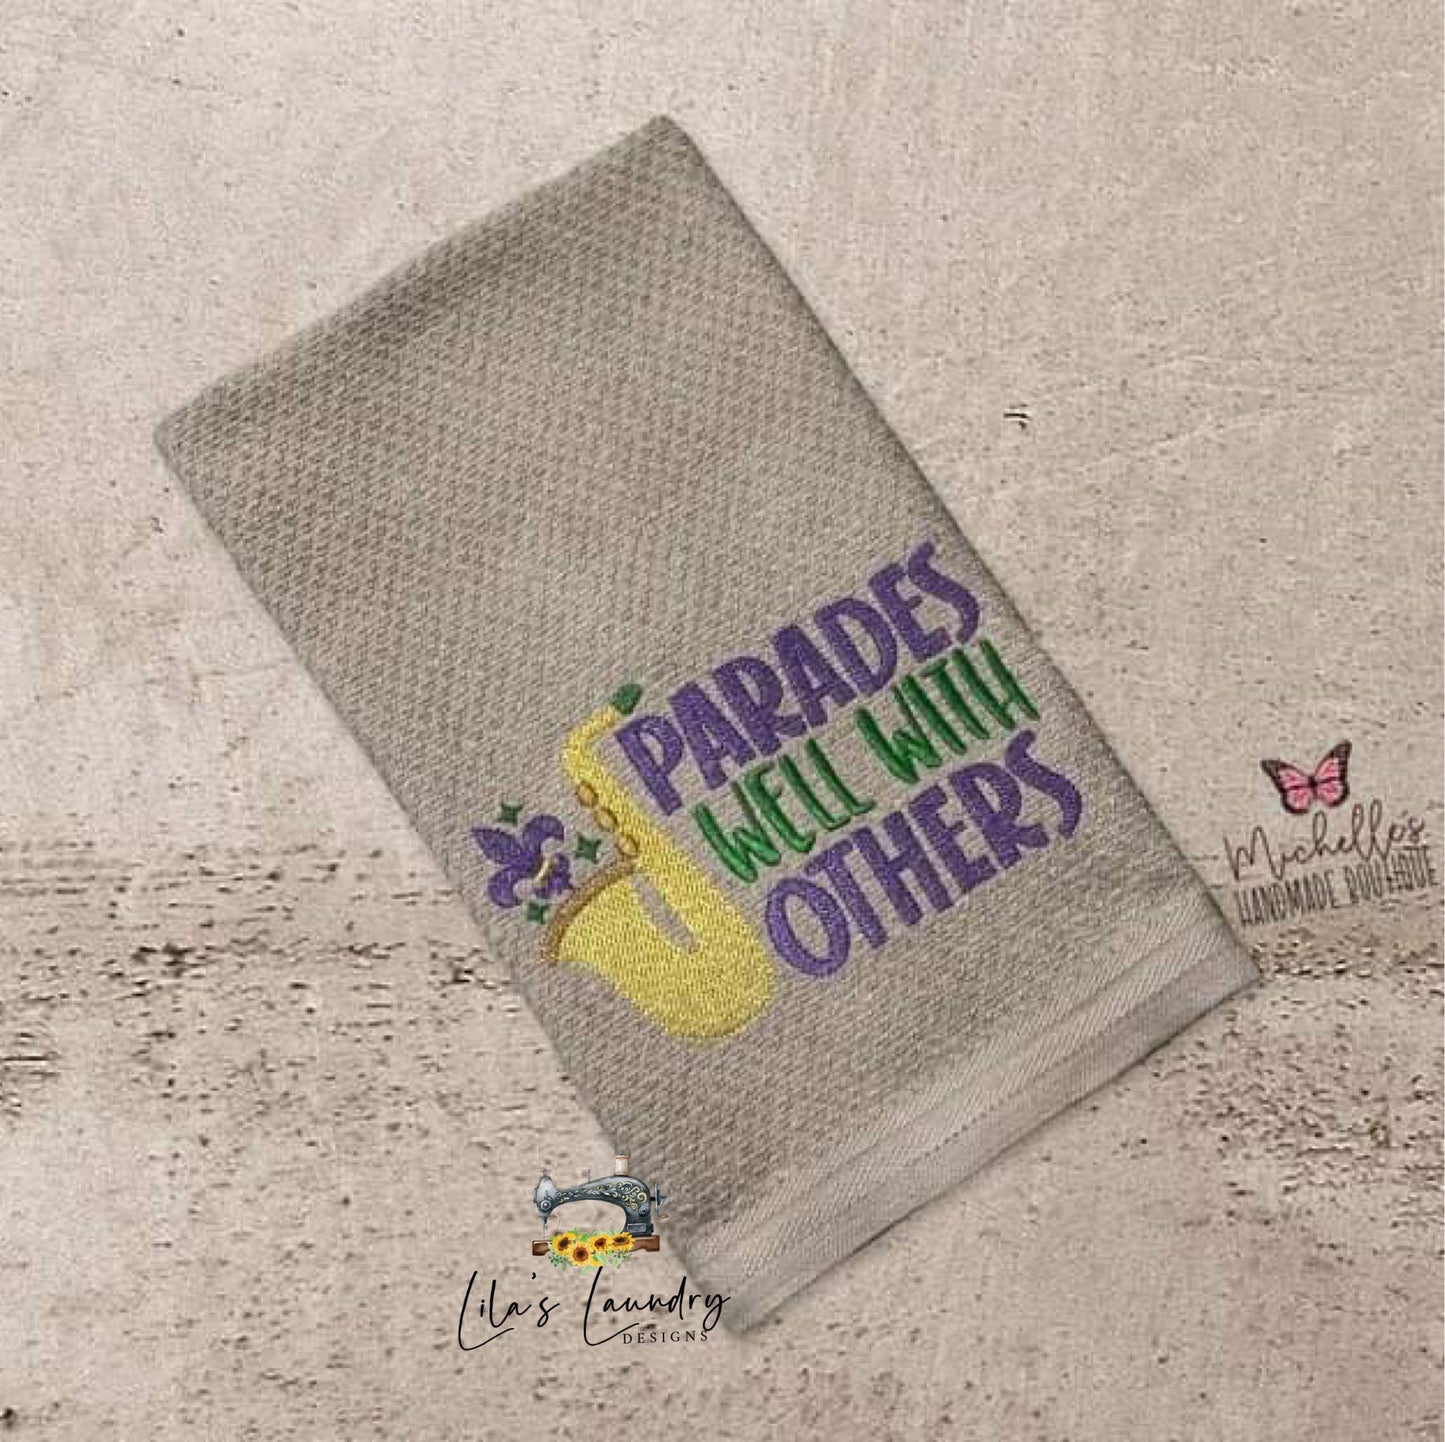 Parades well with others - 3 sizes- Digital Embroidery Design